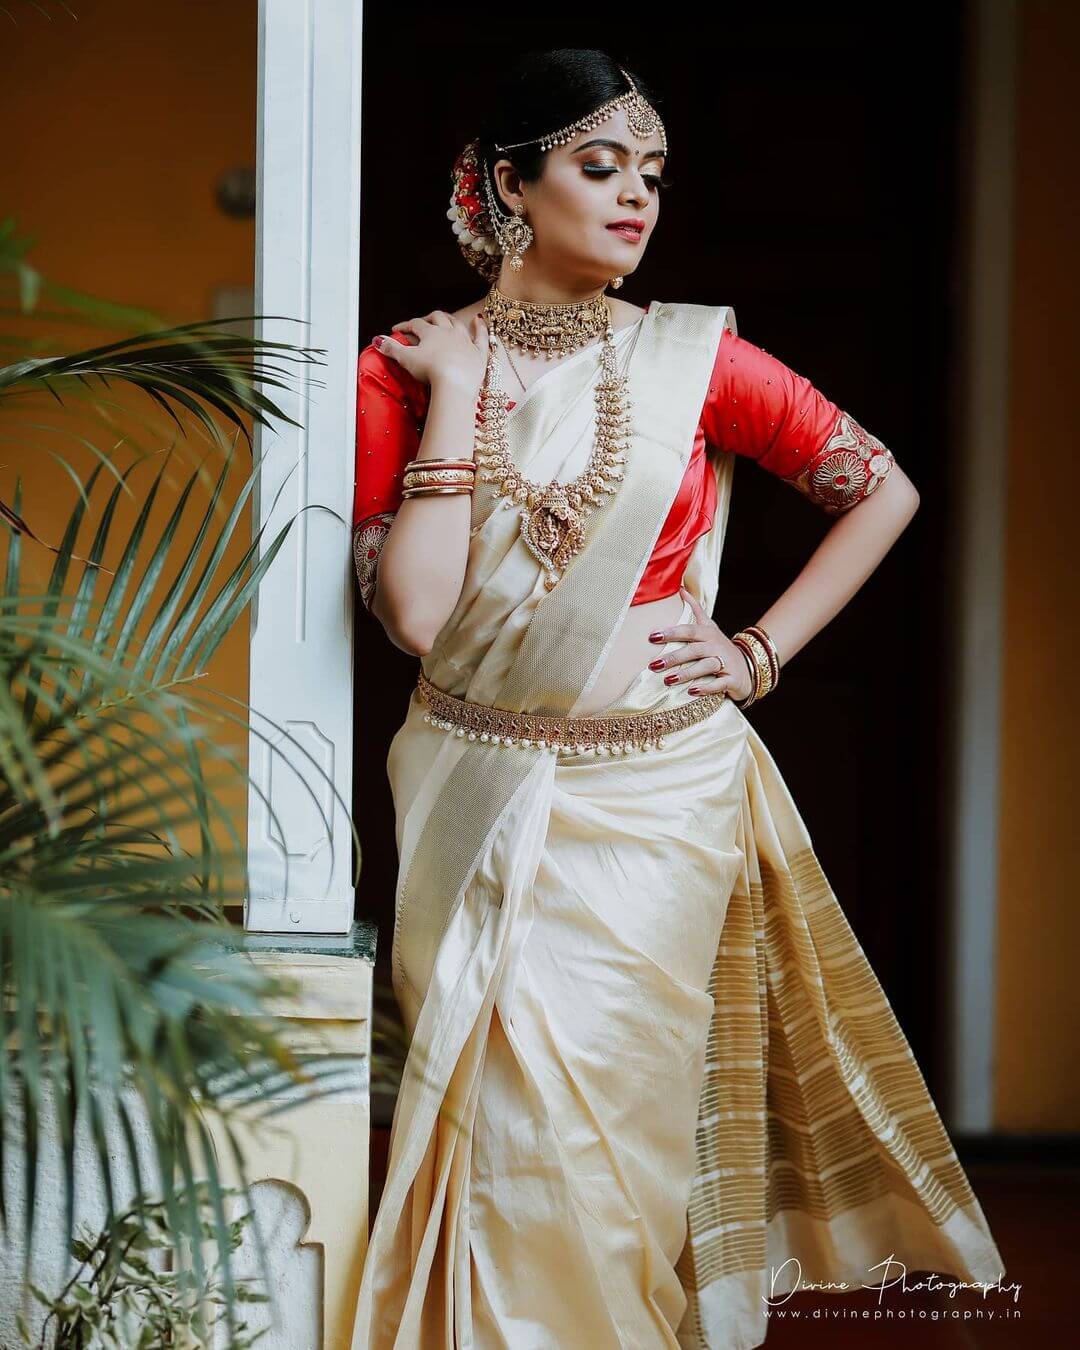 Traditional Golden Kancheepuram saree every bride will love 🥰🥰 Outfit  @mugdhaartstudio Follow @southindianbridalfashion for daily dose of… |  Instagram